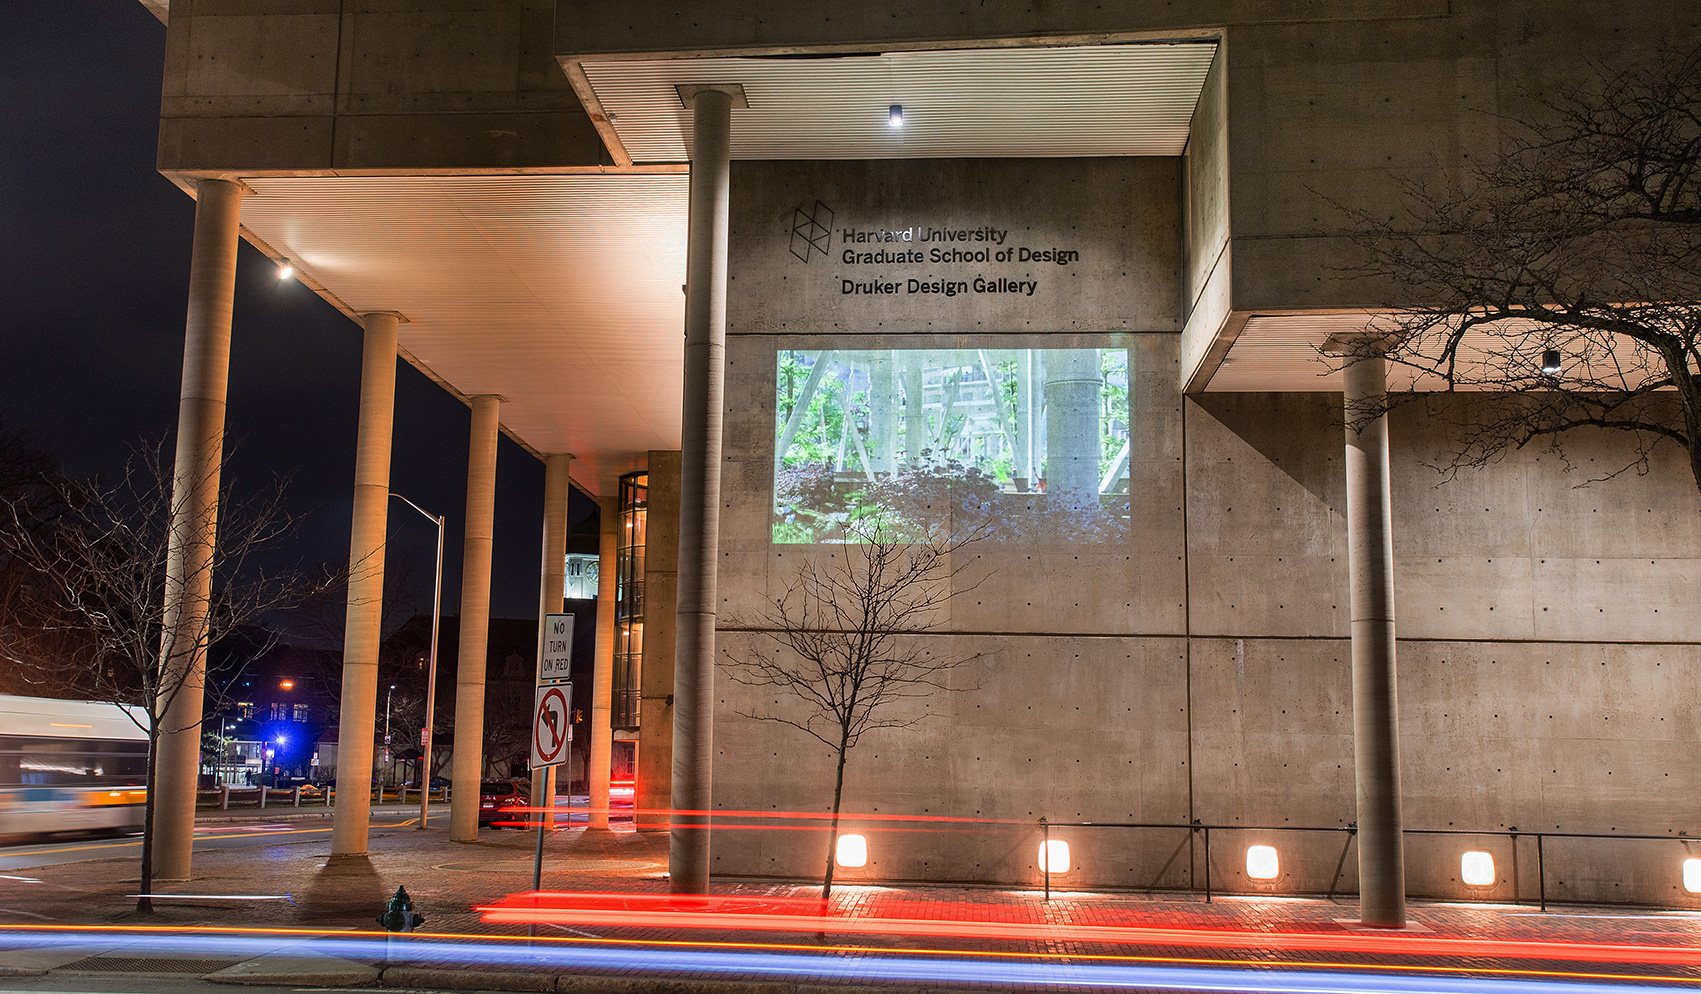 The Cambridge Street facade of Gund hall at night. On the wall is projected an image of white structural columns of a building, creating an open area filled with trees and vegetation.